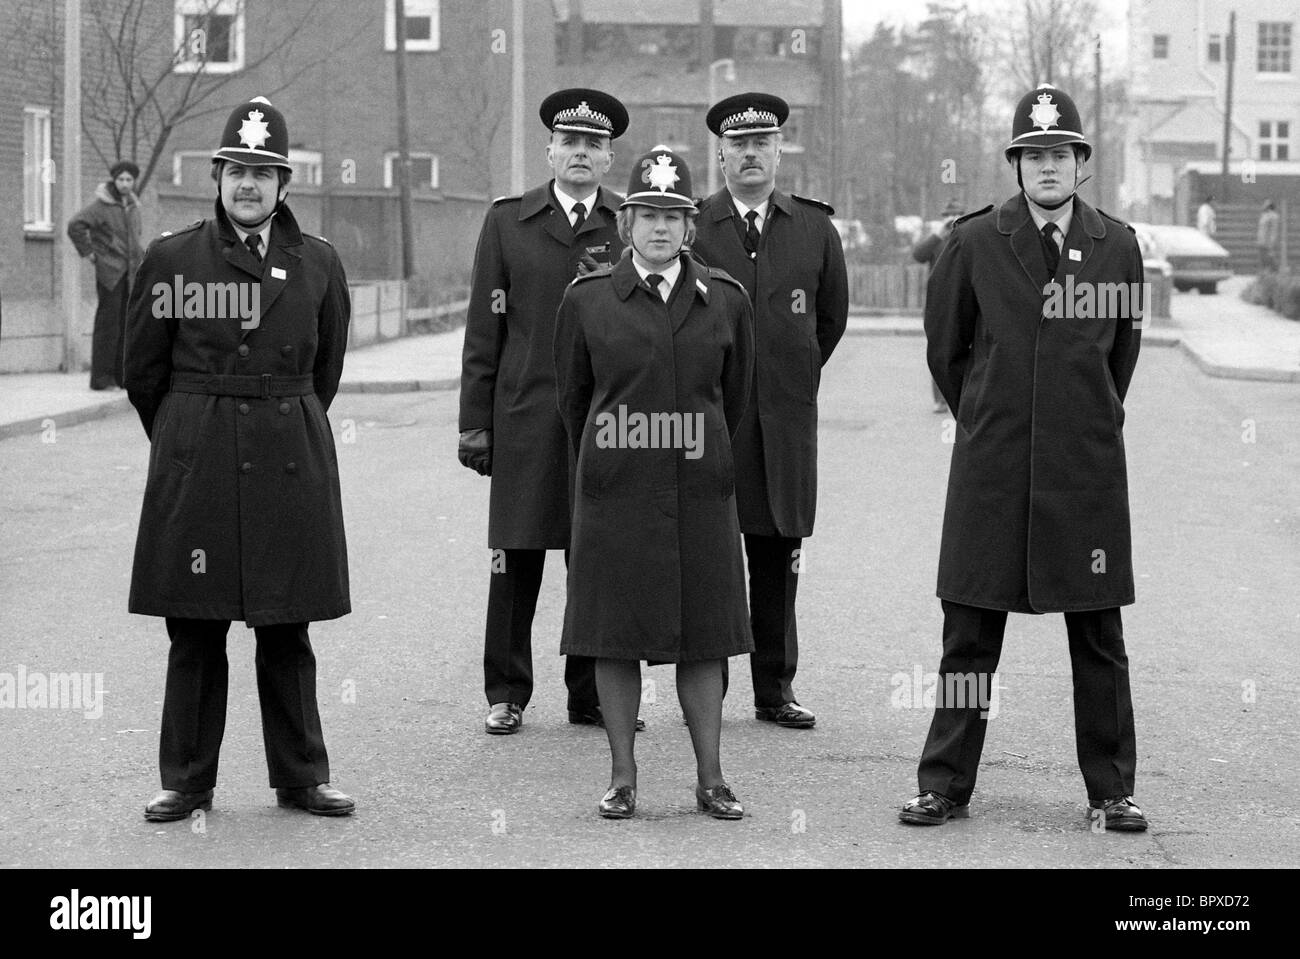 British police officer Black and White Stock Photos & Images - Alamy